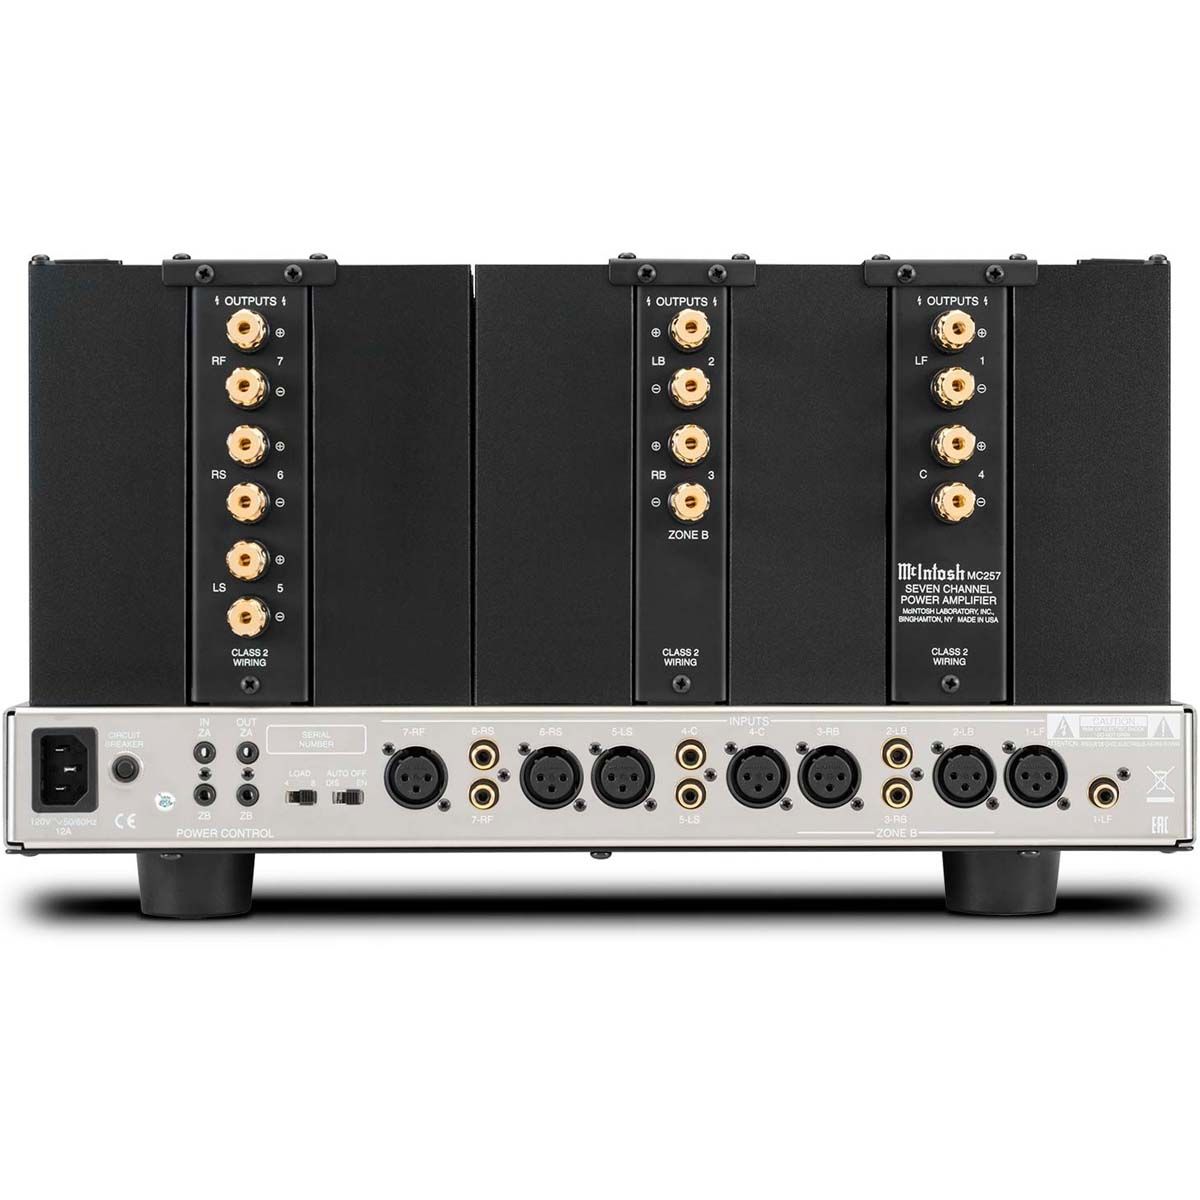 McIntosh MC257 7-channel Solid State Amplifier - rear view